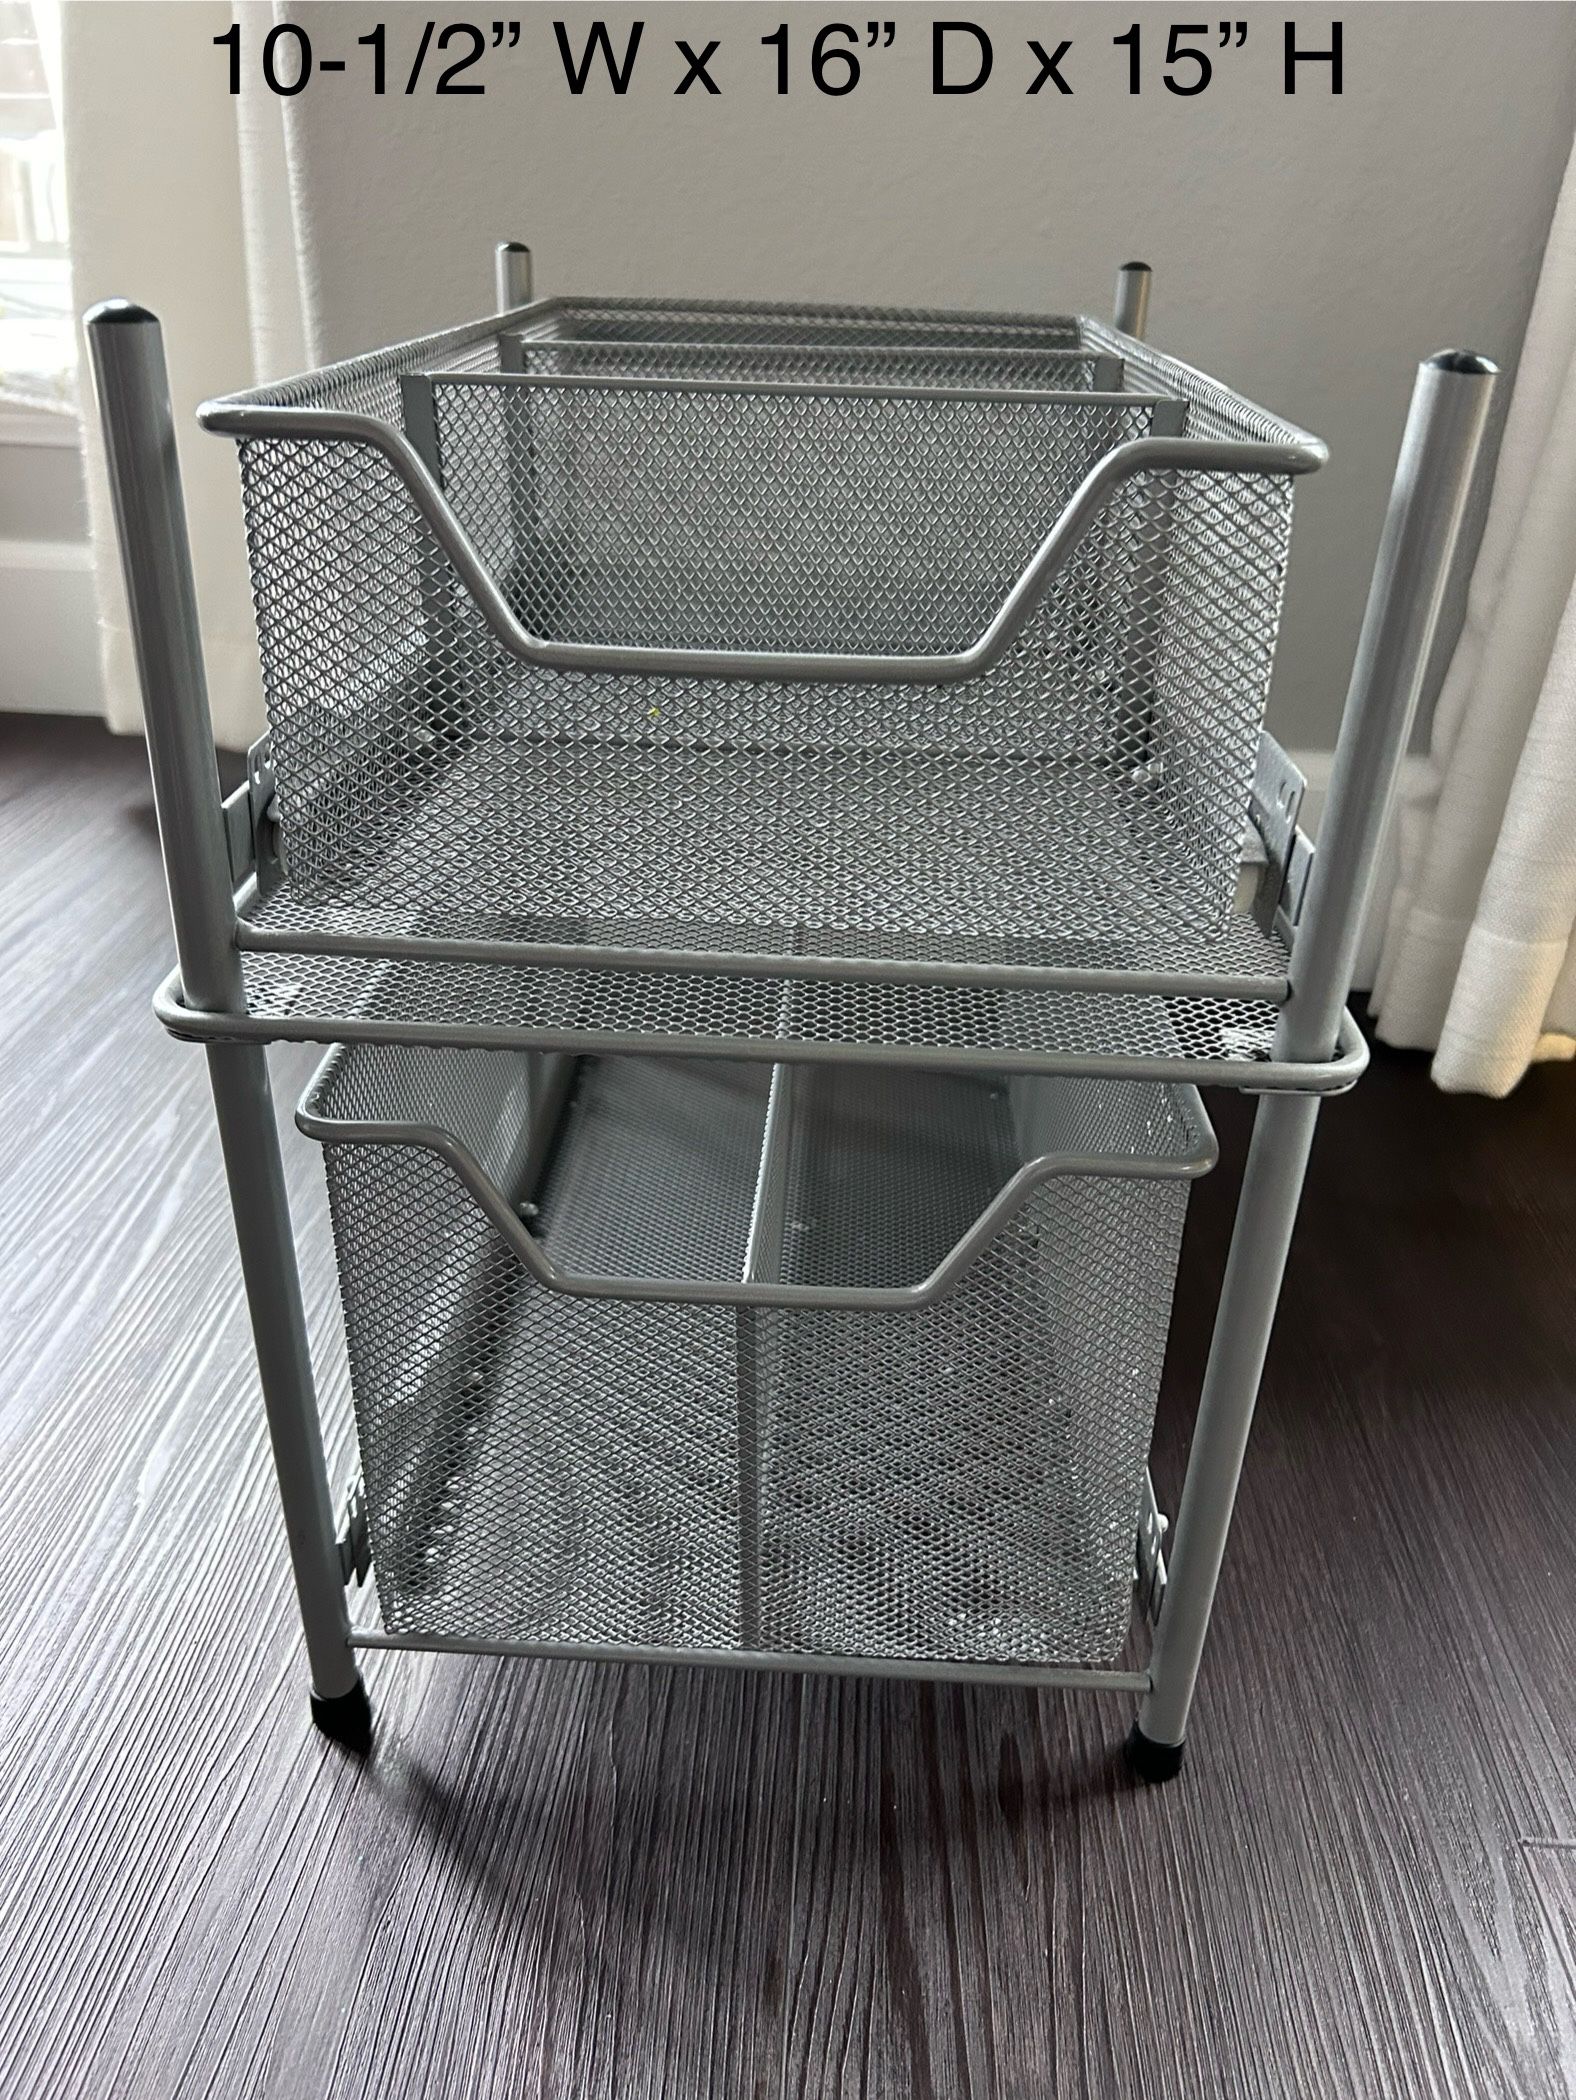 Two-Tier Organizer W/ Pull Out Drawers